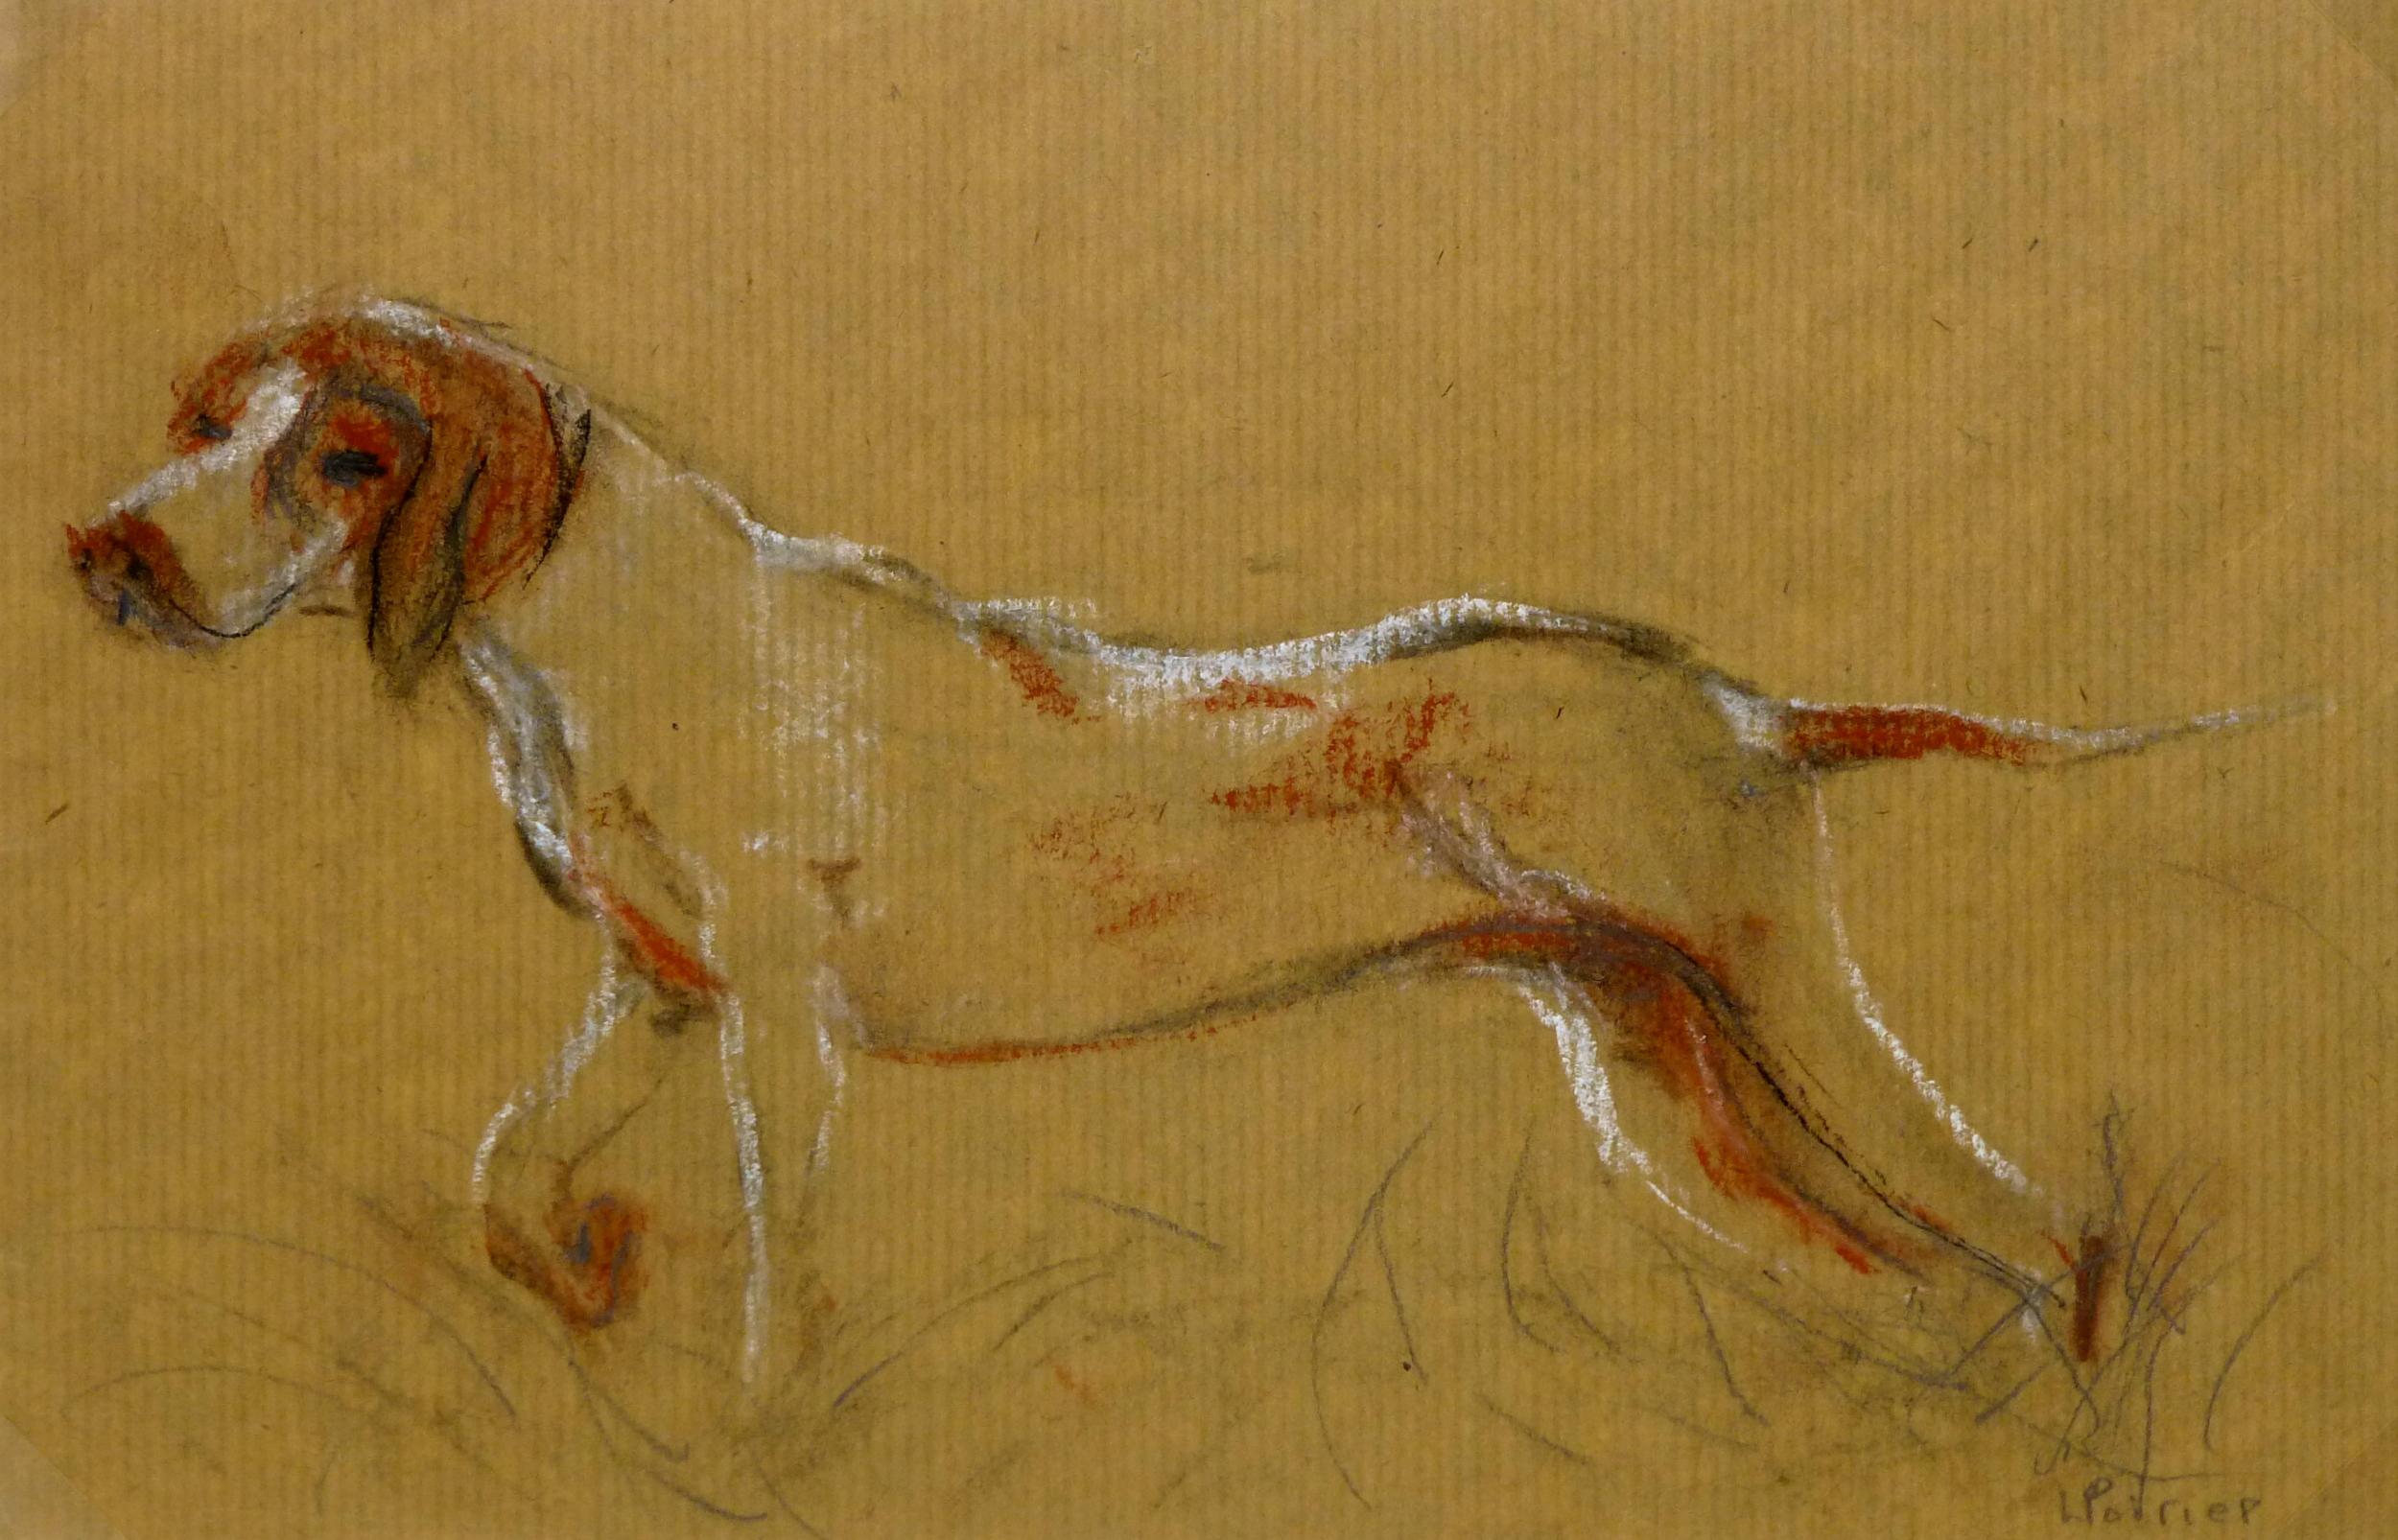 Dog Pencil Drawing, Sketch - Louisette Poirier, The Hunting Hound, c. 1960